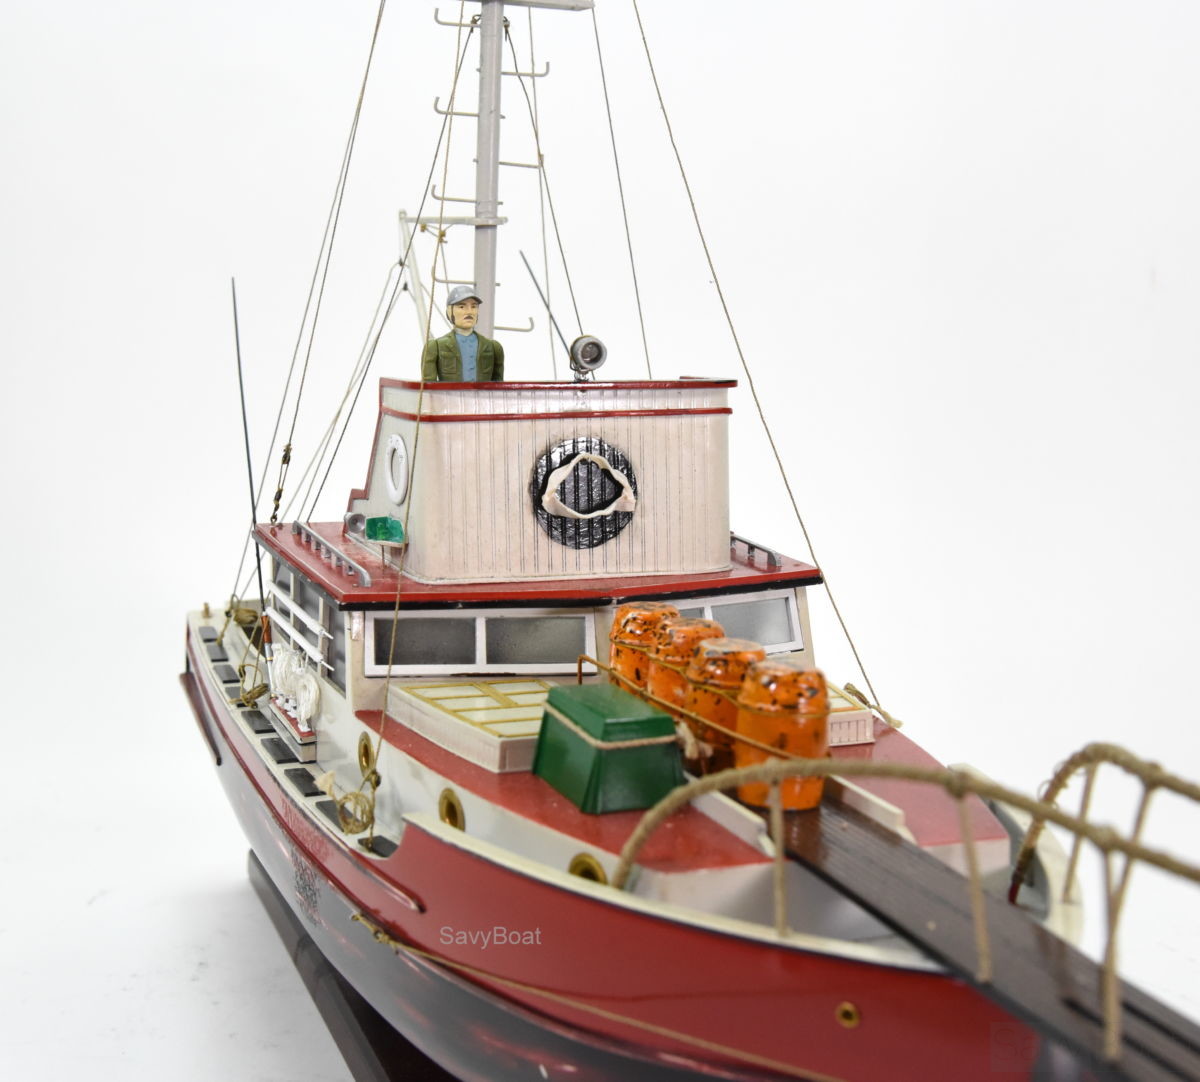 orca from jaws movie- handcrafted boat model savyboat